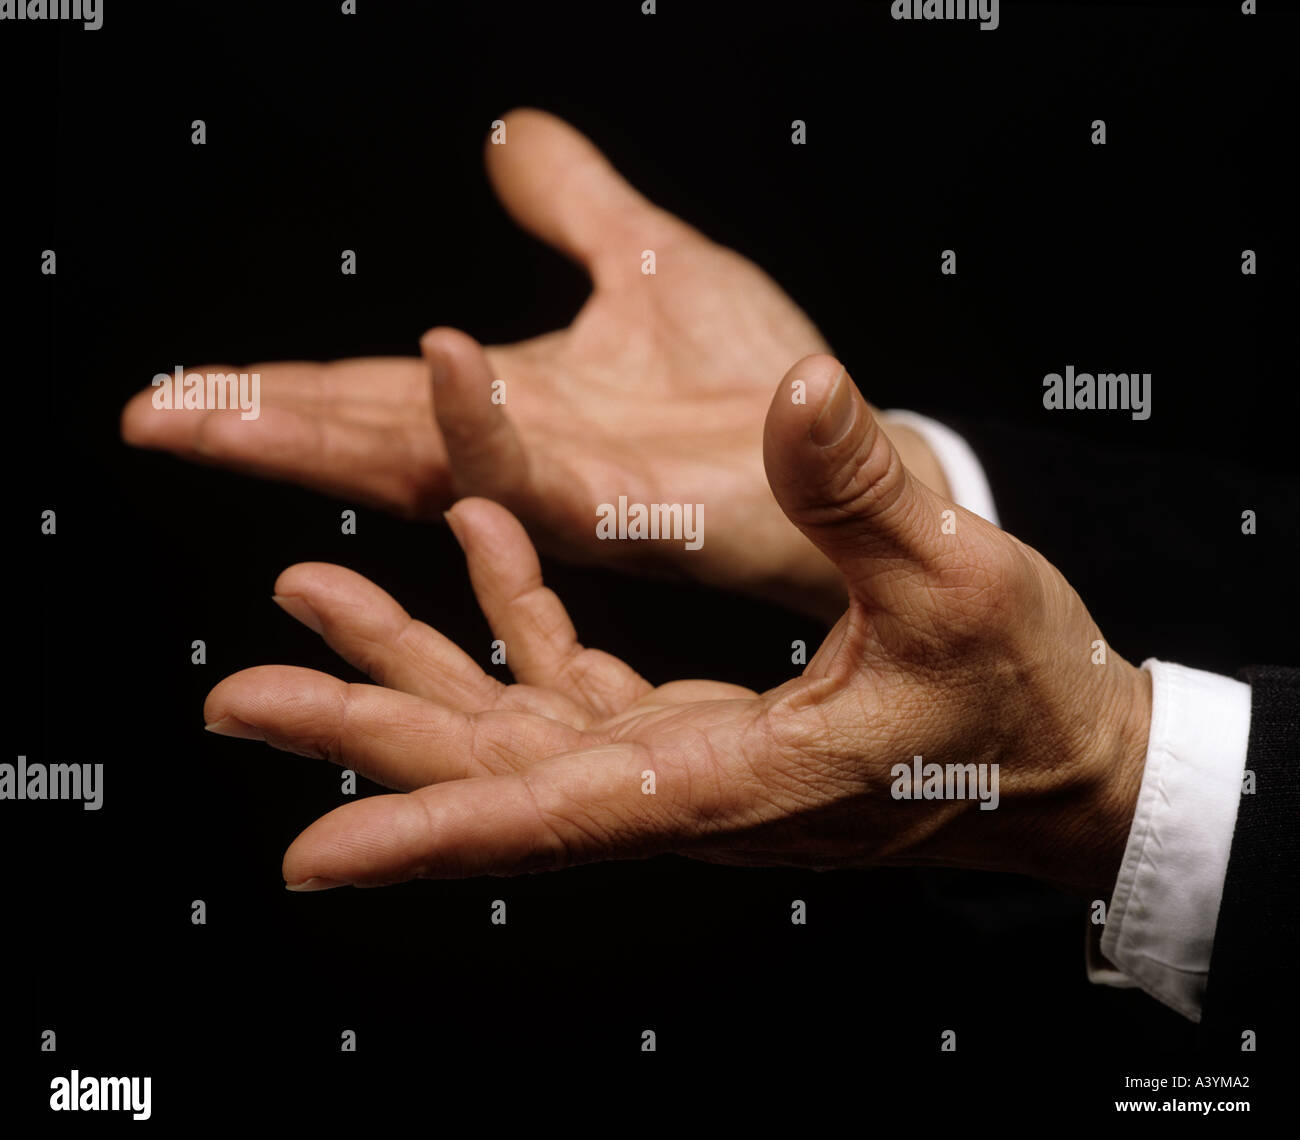 two hands making explanatory gesture Stock Photo